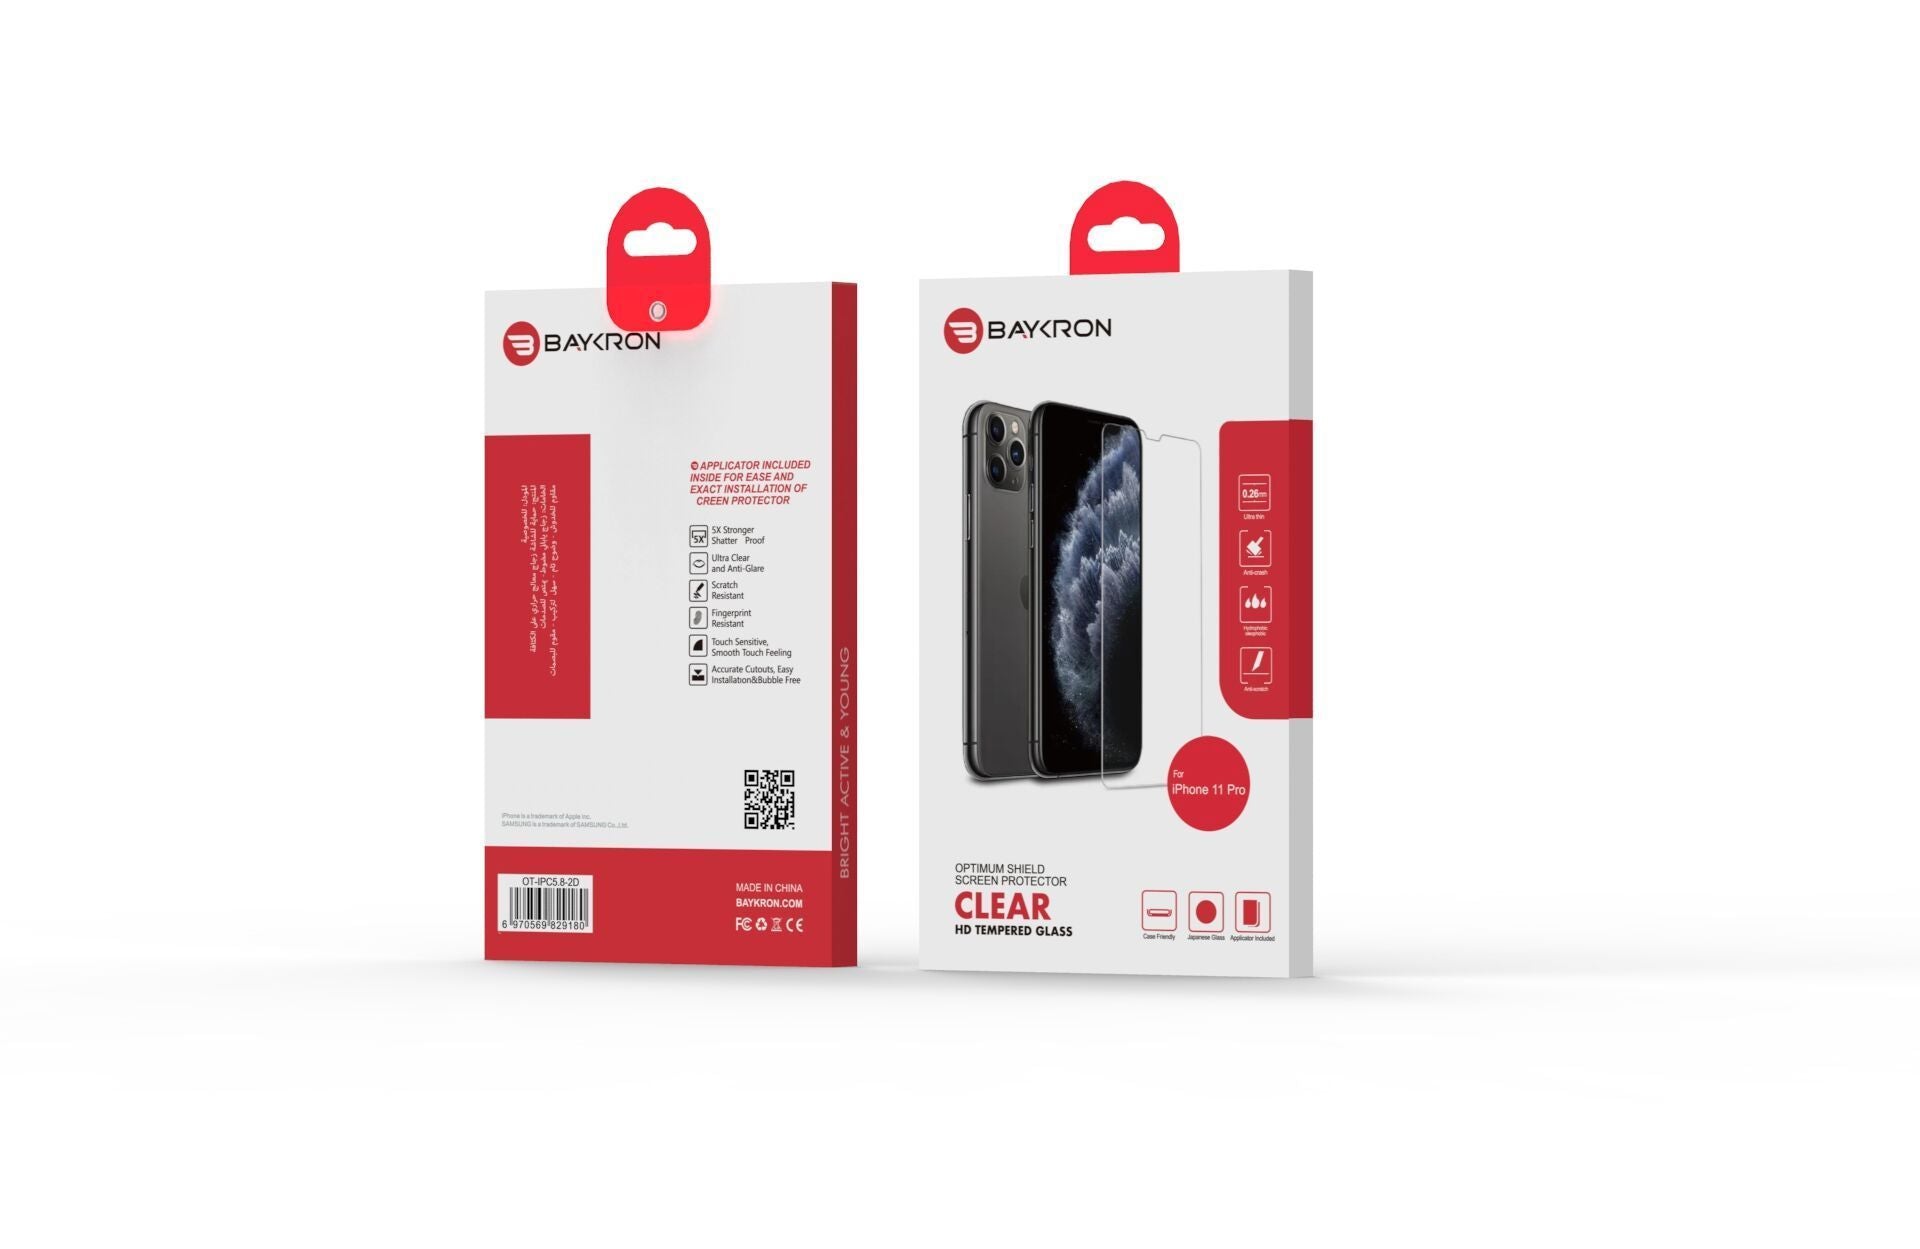 iPhone 11 Pro Ultra-Slim CLEAR HD Tempered Glass